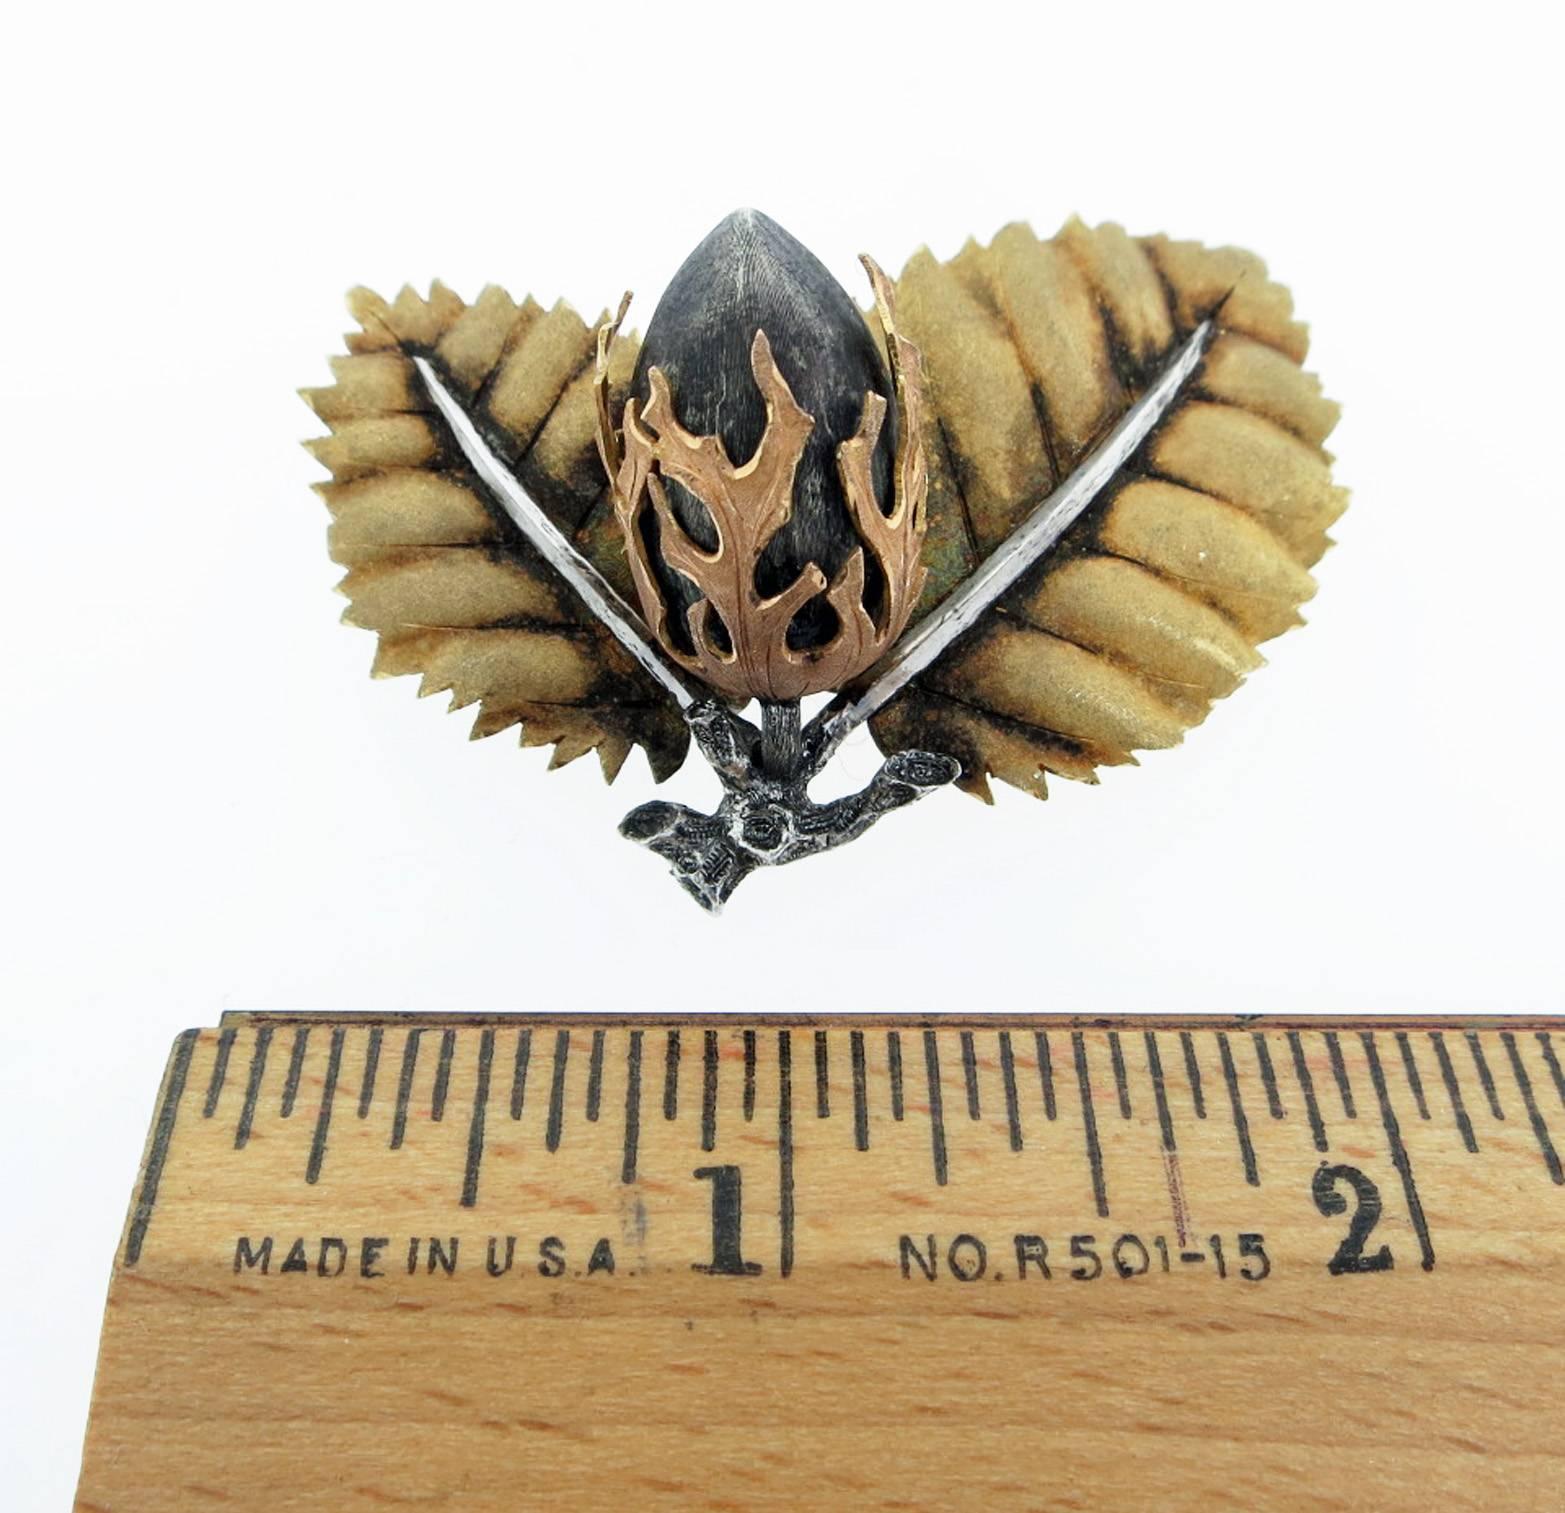  18kt. and silver acorn leaf brooch made by Bucellatti . The brooch measures 2 inches in length  with a double clip back.